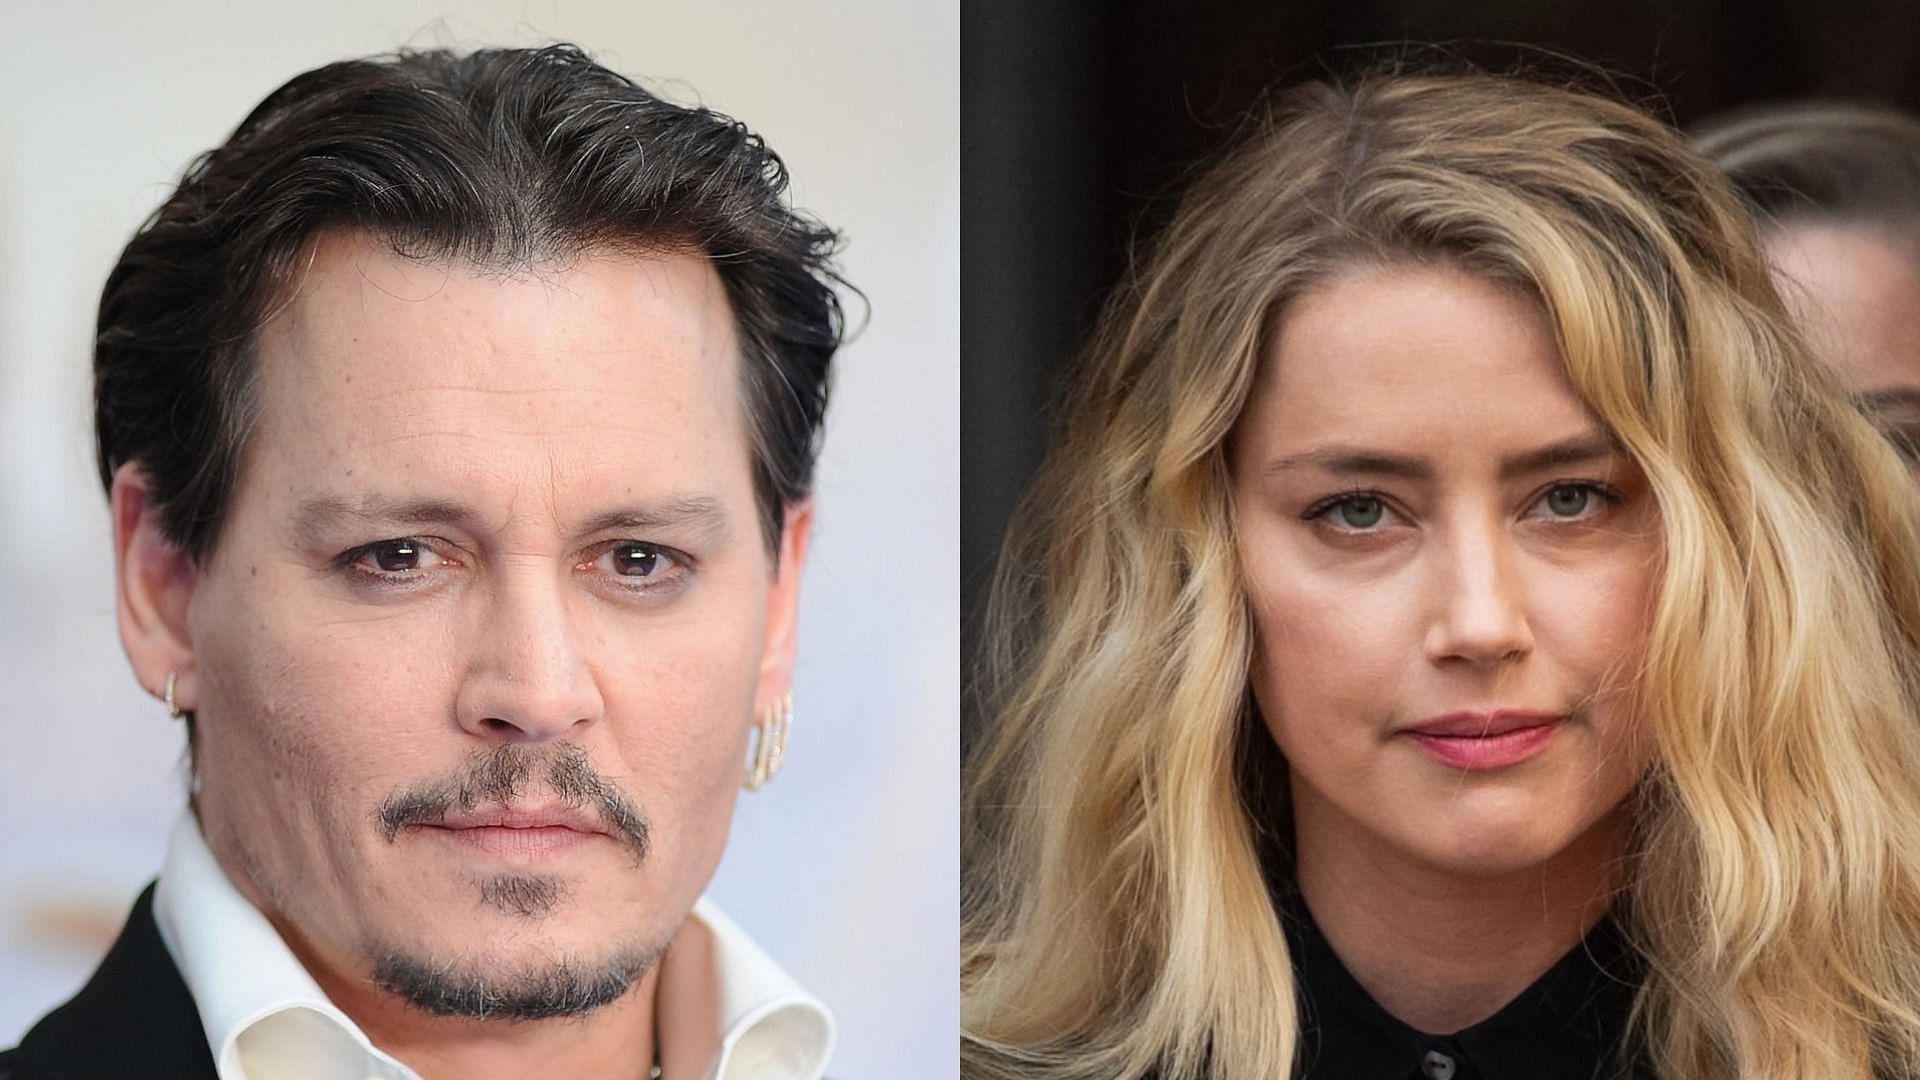 Johnny Depp&#039;s controversial texts about Amber Heard were read in court during the ongoing defamation trial (Image via Getty Images and WireImage)